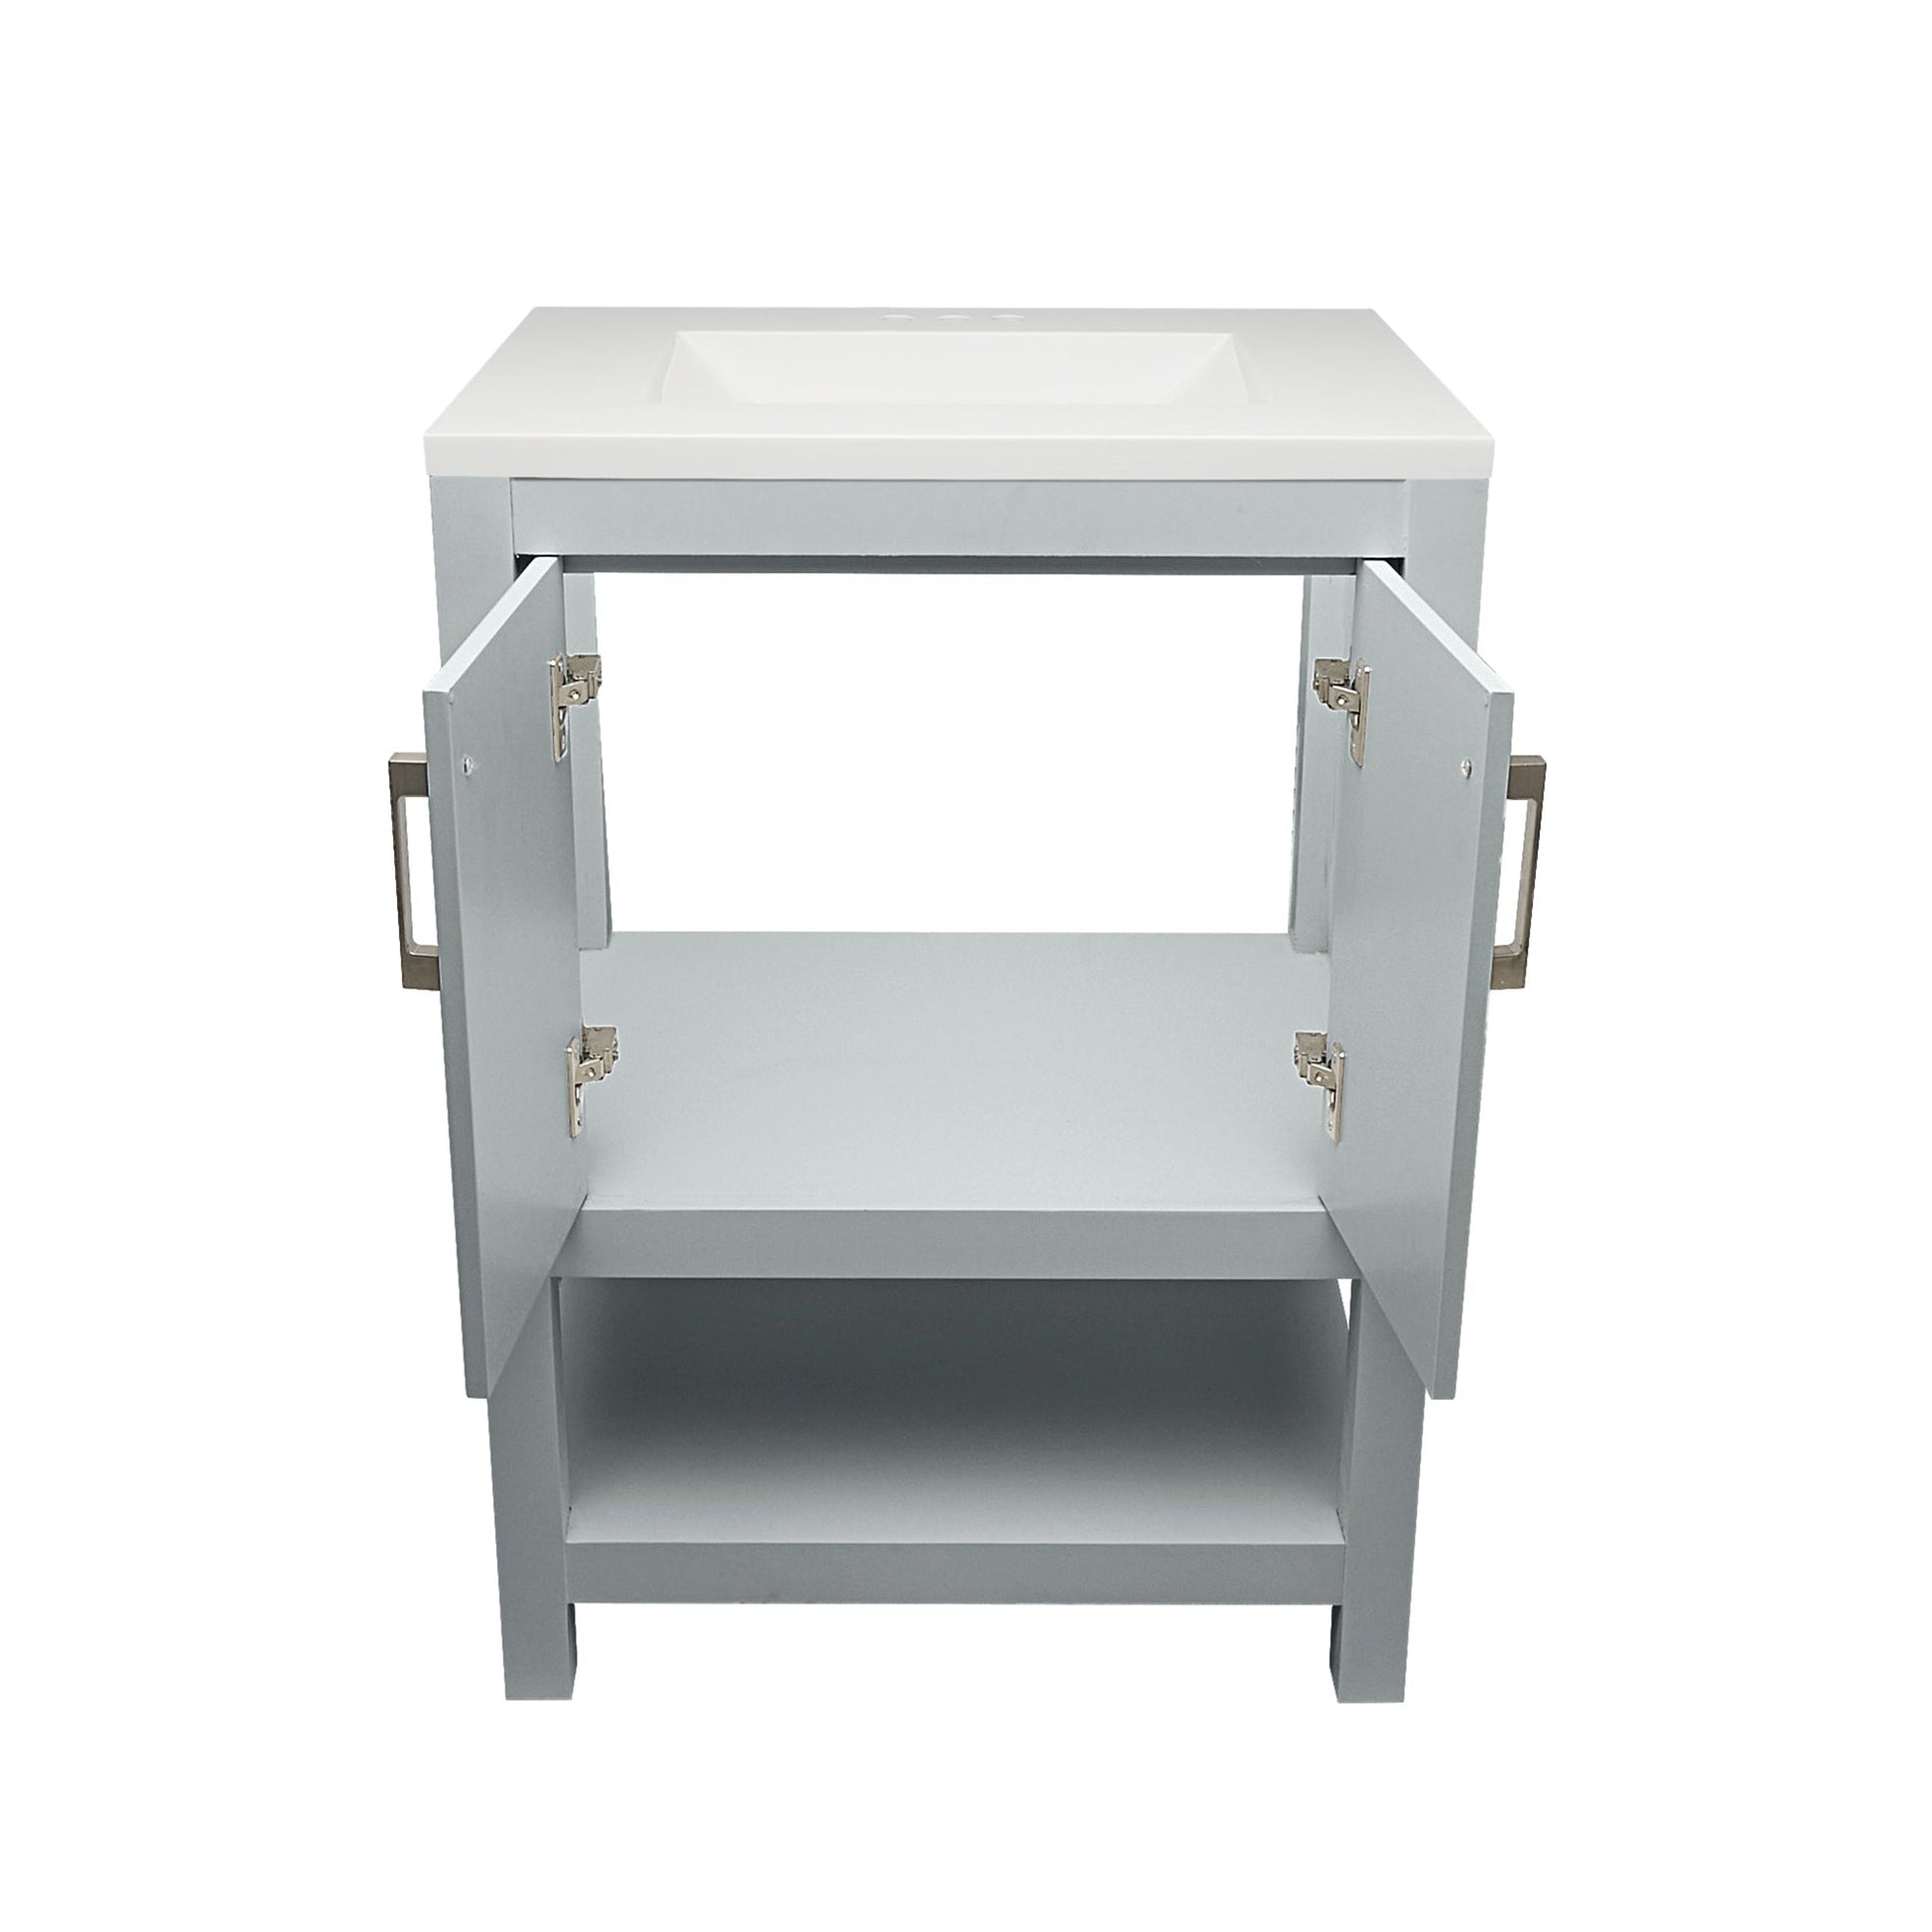 Ella's Bubbles Taos 25" Gray Bathroom Vanity With White Cultured Marble Top and Sink